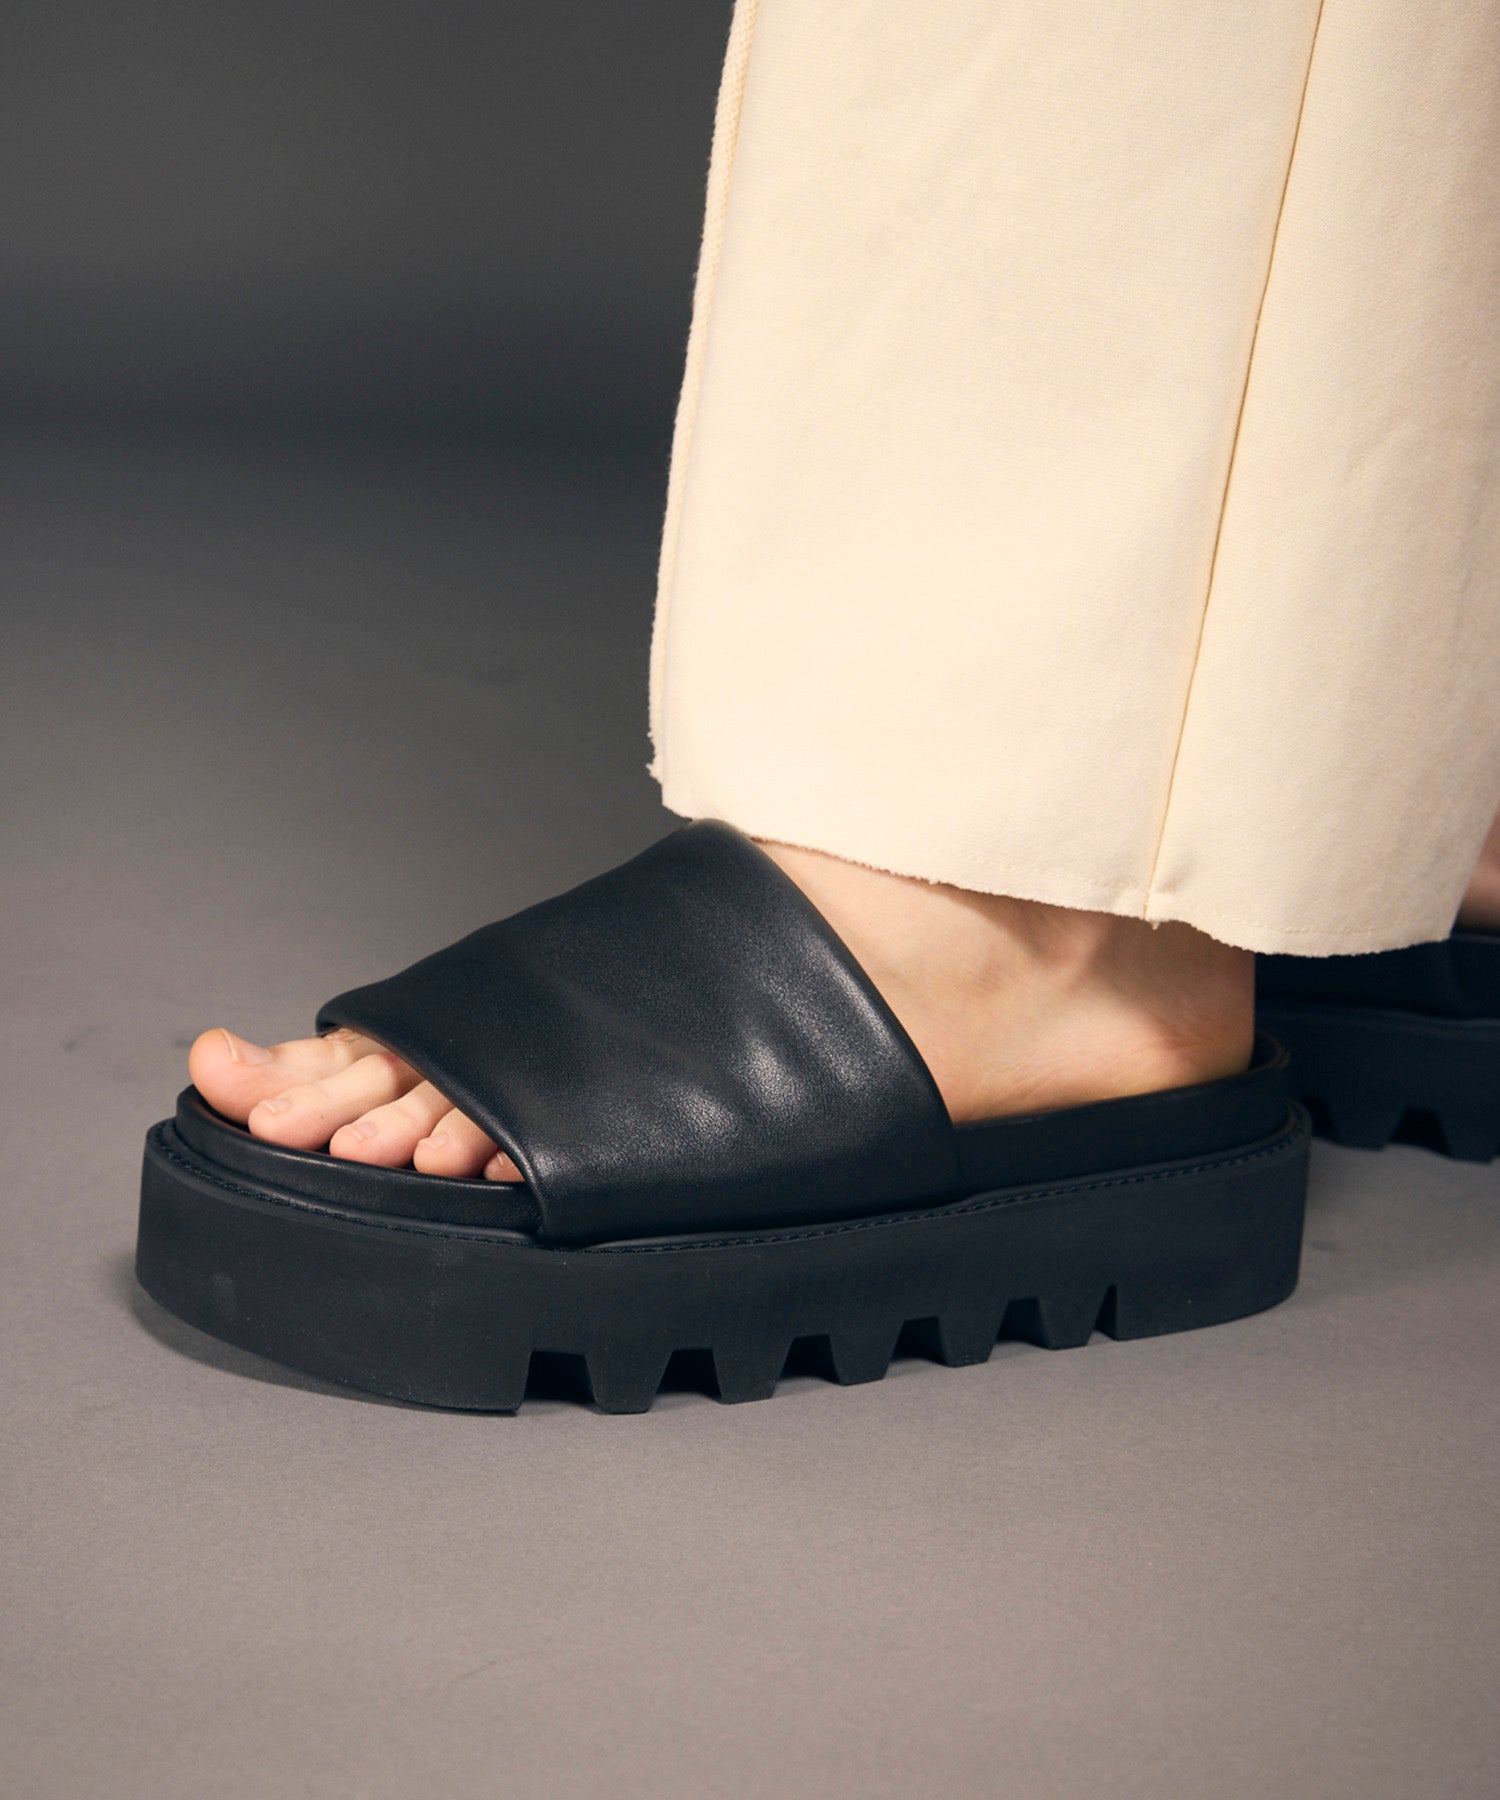 [Special SHOES FACTORY COLLABORATION] Tank Sole Shower Sandal Made in Tokyo